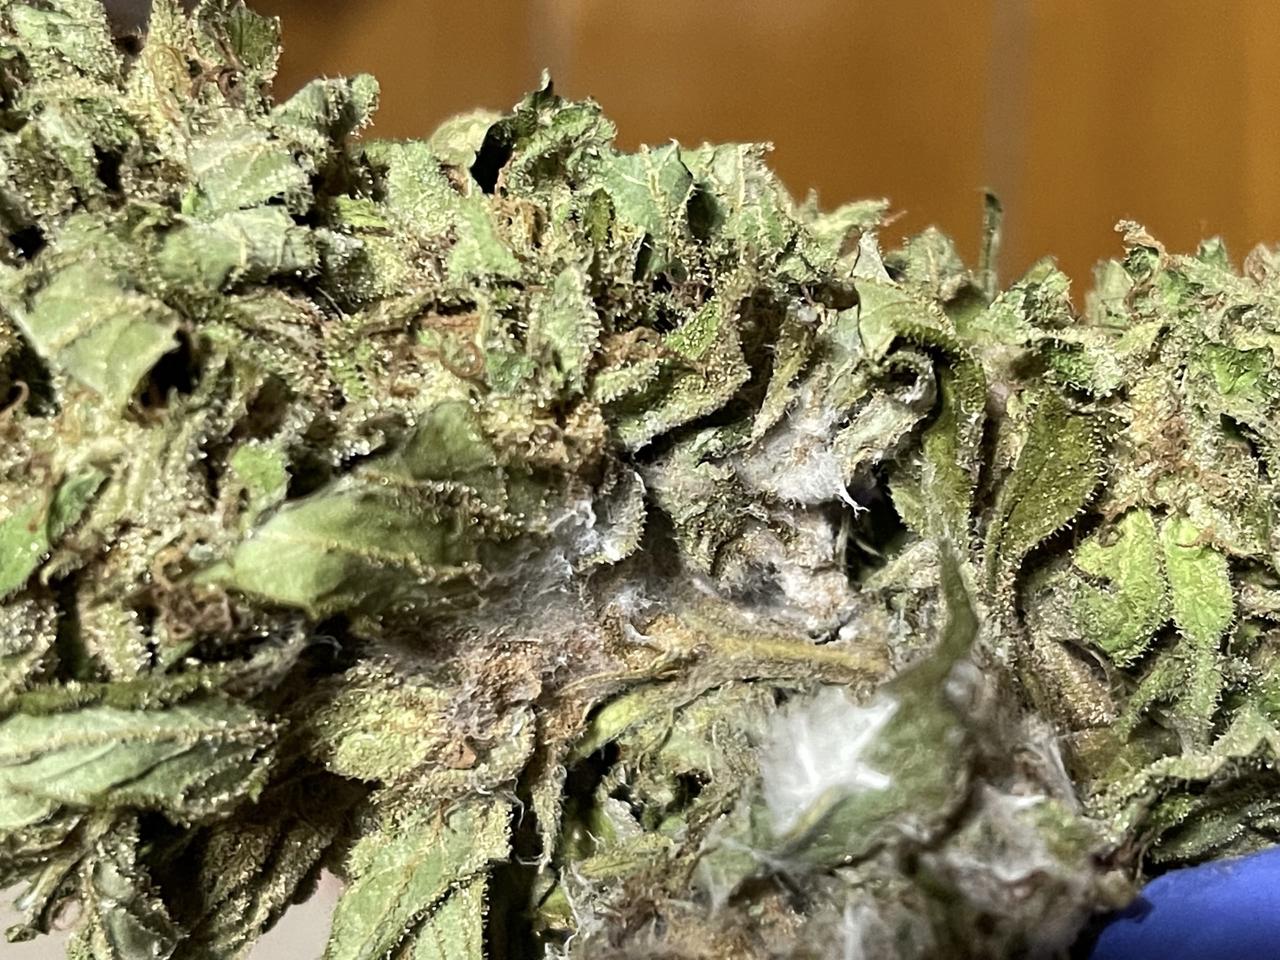 grey mold on weed buds after drying